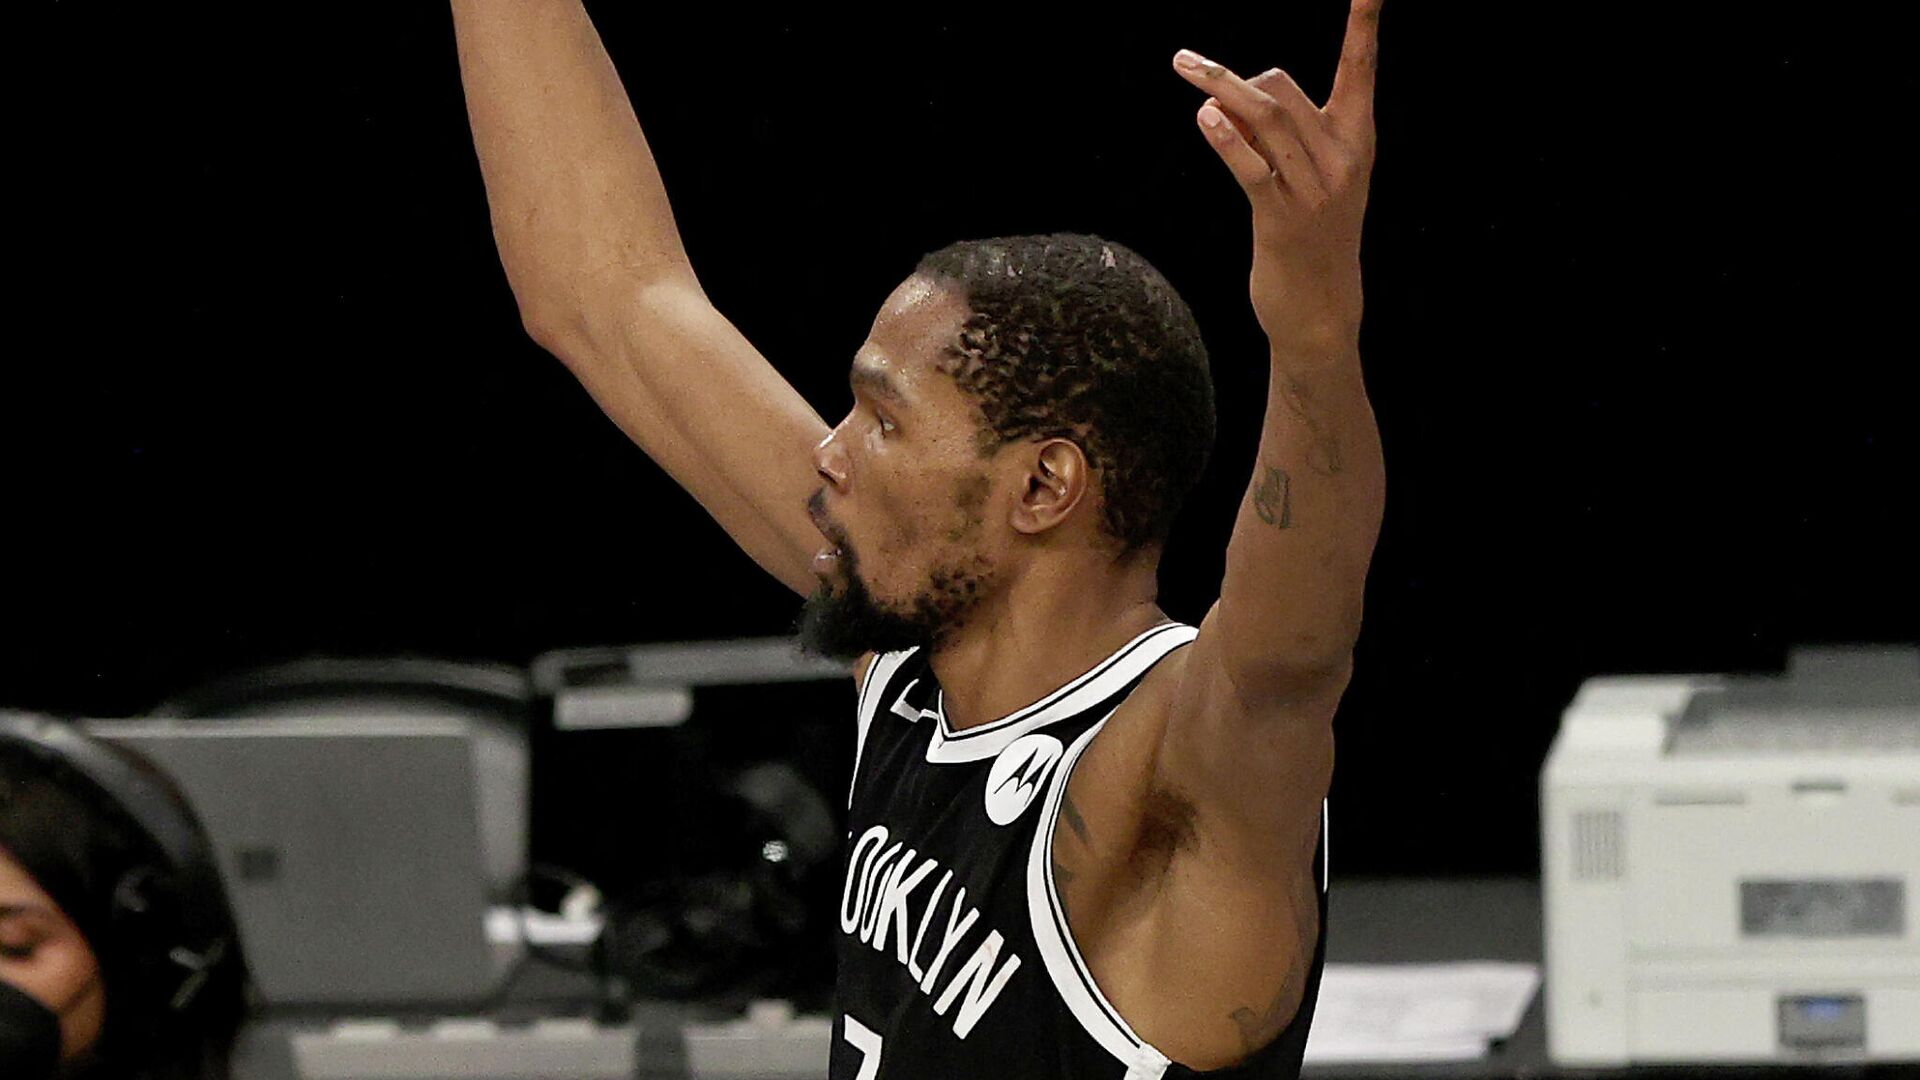 NEW YORK, NEW YORK - JUNE 19: Kevin Durant #7 of the Brooklyn Nets celebrates after he made a shot to tie the game and force overtime in the final seconds of the fourth quarter against the Milwaukee Bucks during game seven of the Eastern Conference second round at Barclays Center on June 19, 2021 in the Brooklyn borough of New York City. NOTE TO USER: User expressly acknowledges and agrees that, by downloading and or using this photograph, User is consenting to the terms and conditions of the Getty Images License Agreement.   Elsa/Getty Images/AFP (Photo by ELSA / GETTY IMAGES NORTH AMERICA / Getty Images via AFP) - РИА Новости, 1920, 08.08.2021